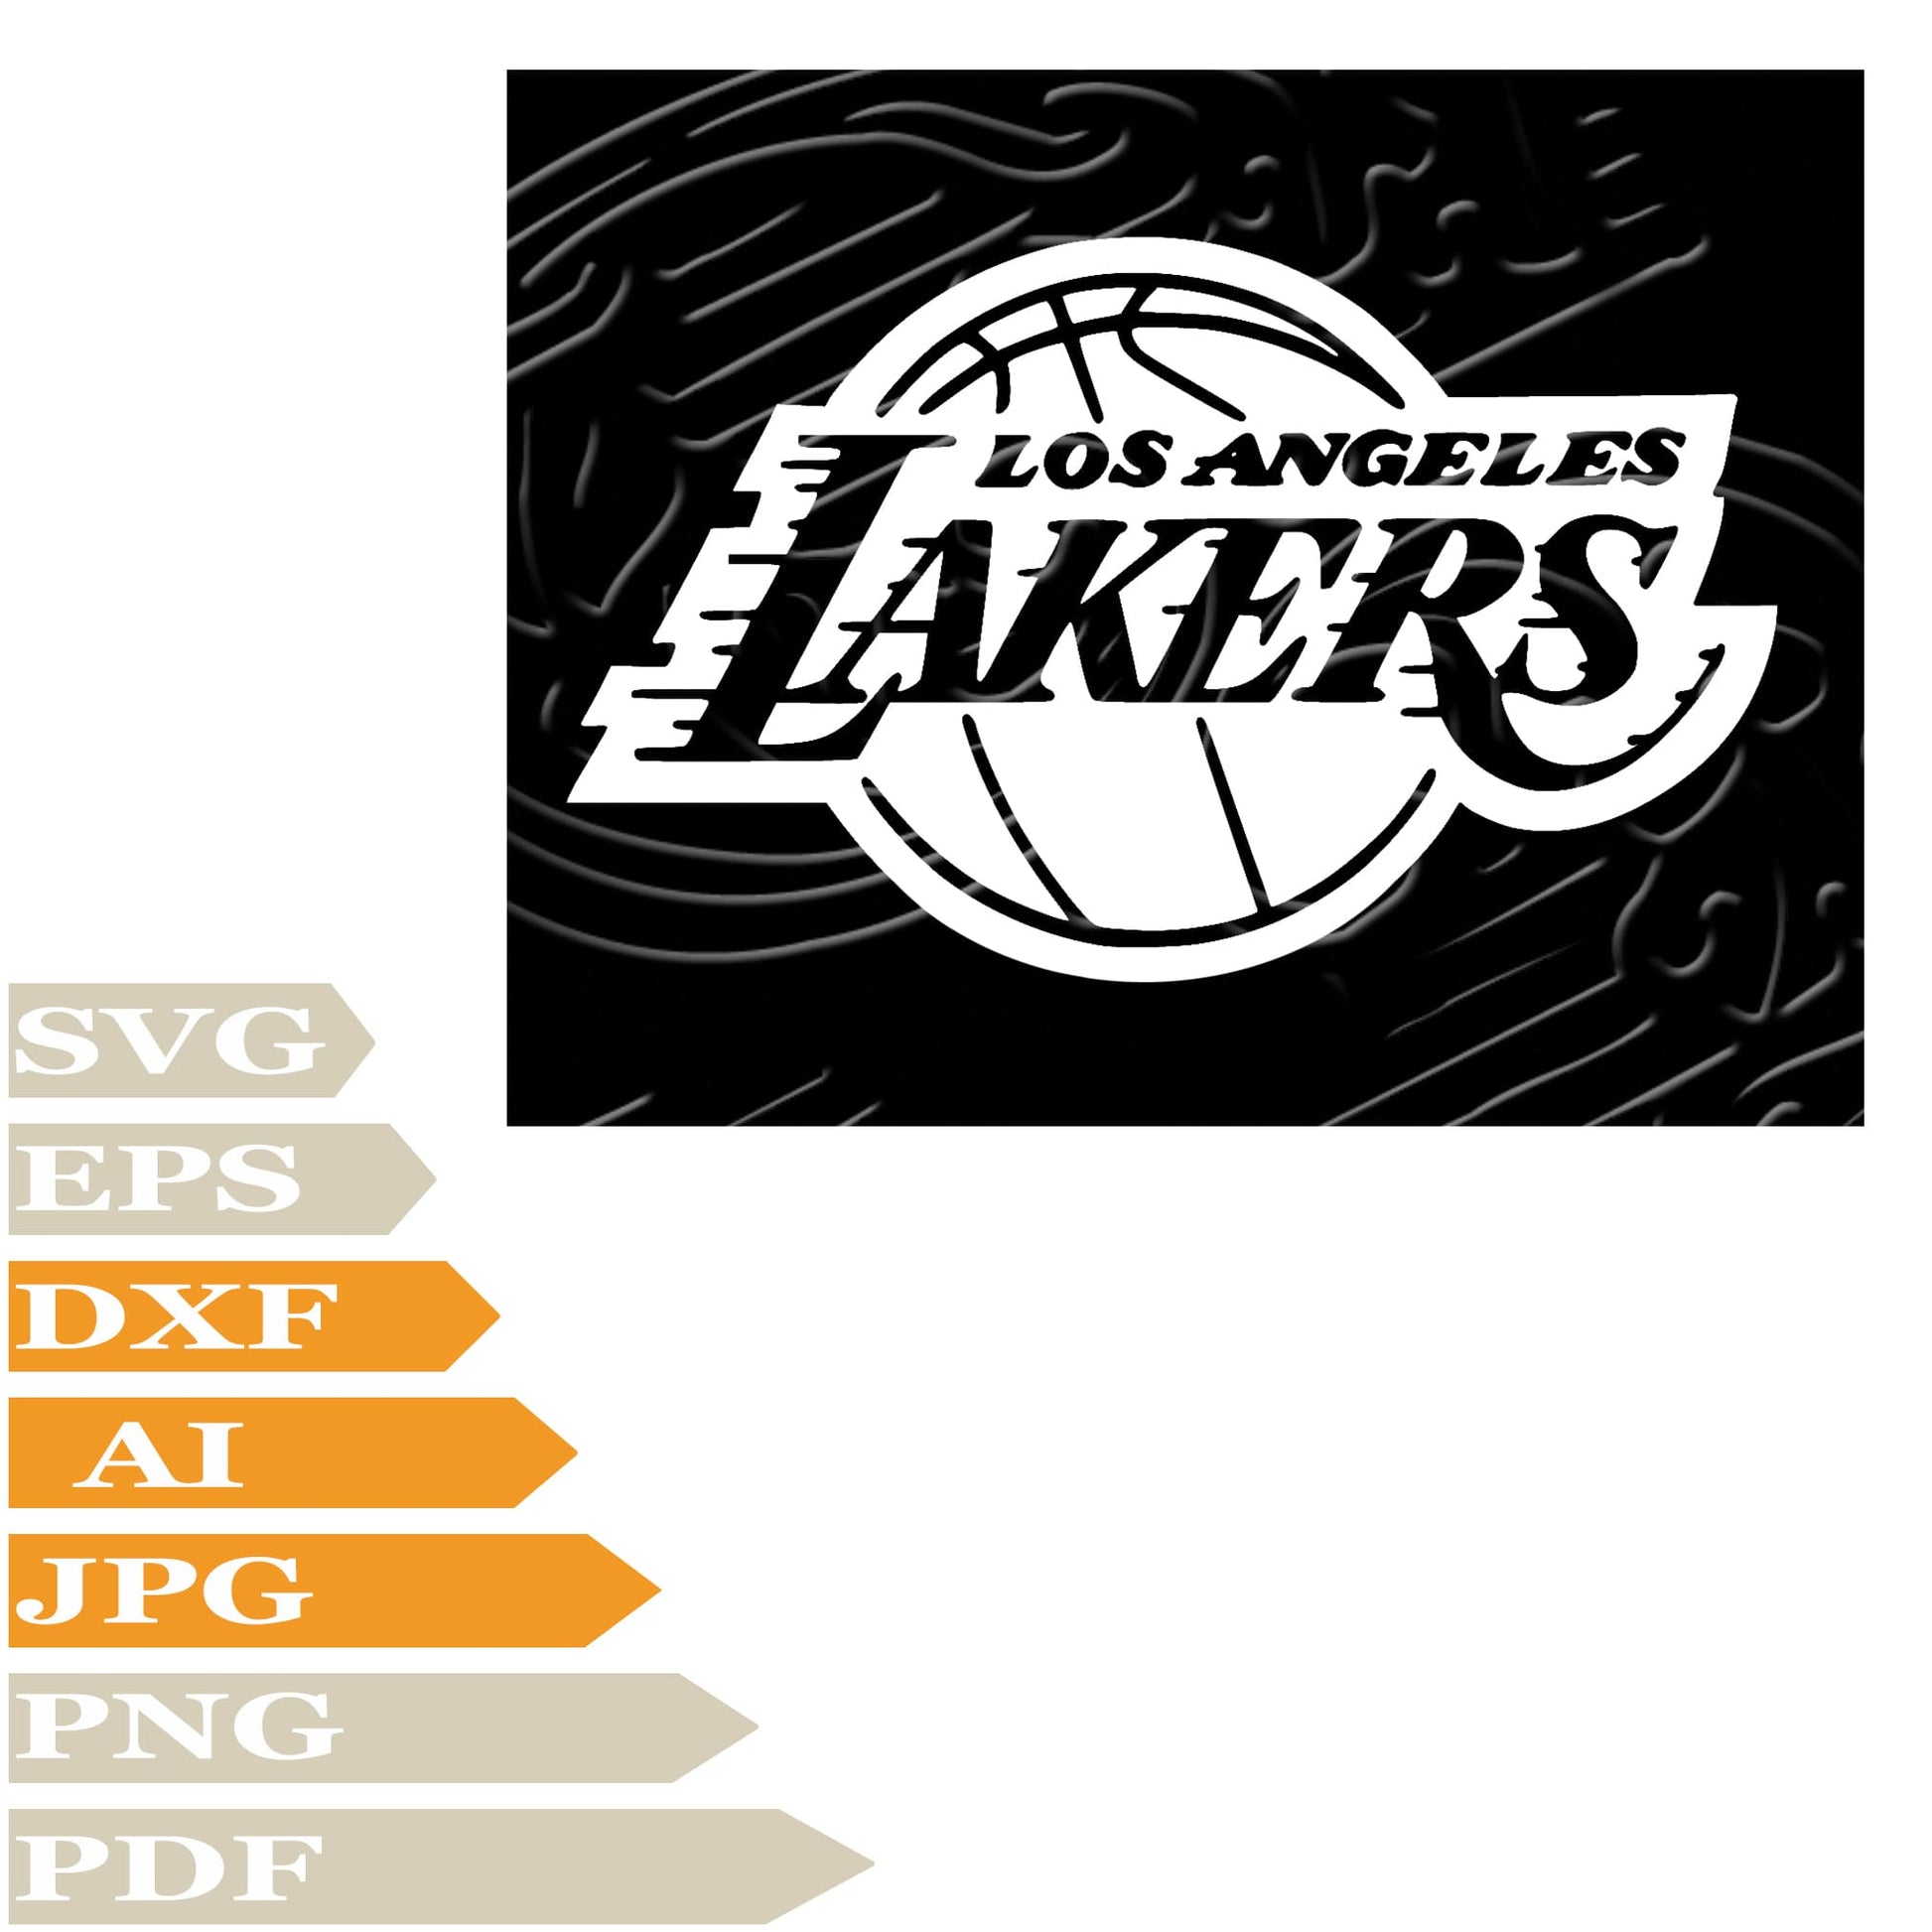 This Black Mamba Svg File Of Kobe Bryant's Face Includes A Range Of Features, Such As A Vector Graphic, A Png, And Svg Designs For Tattoos And Cricut. The Professional Quality, High-Resolution File Ensures A Clear, Sharp Finish Every Time.